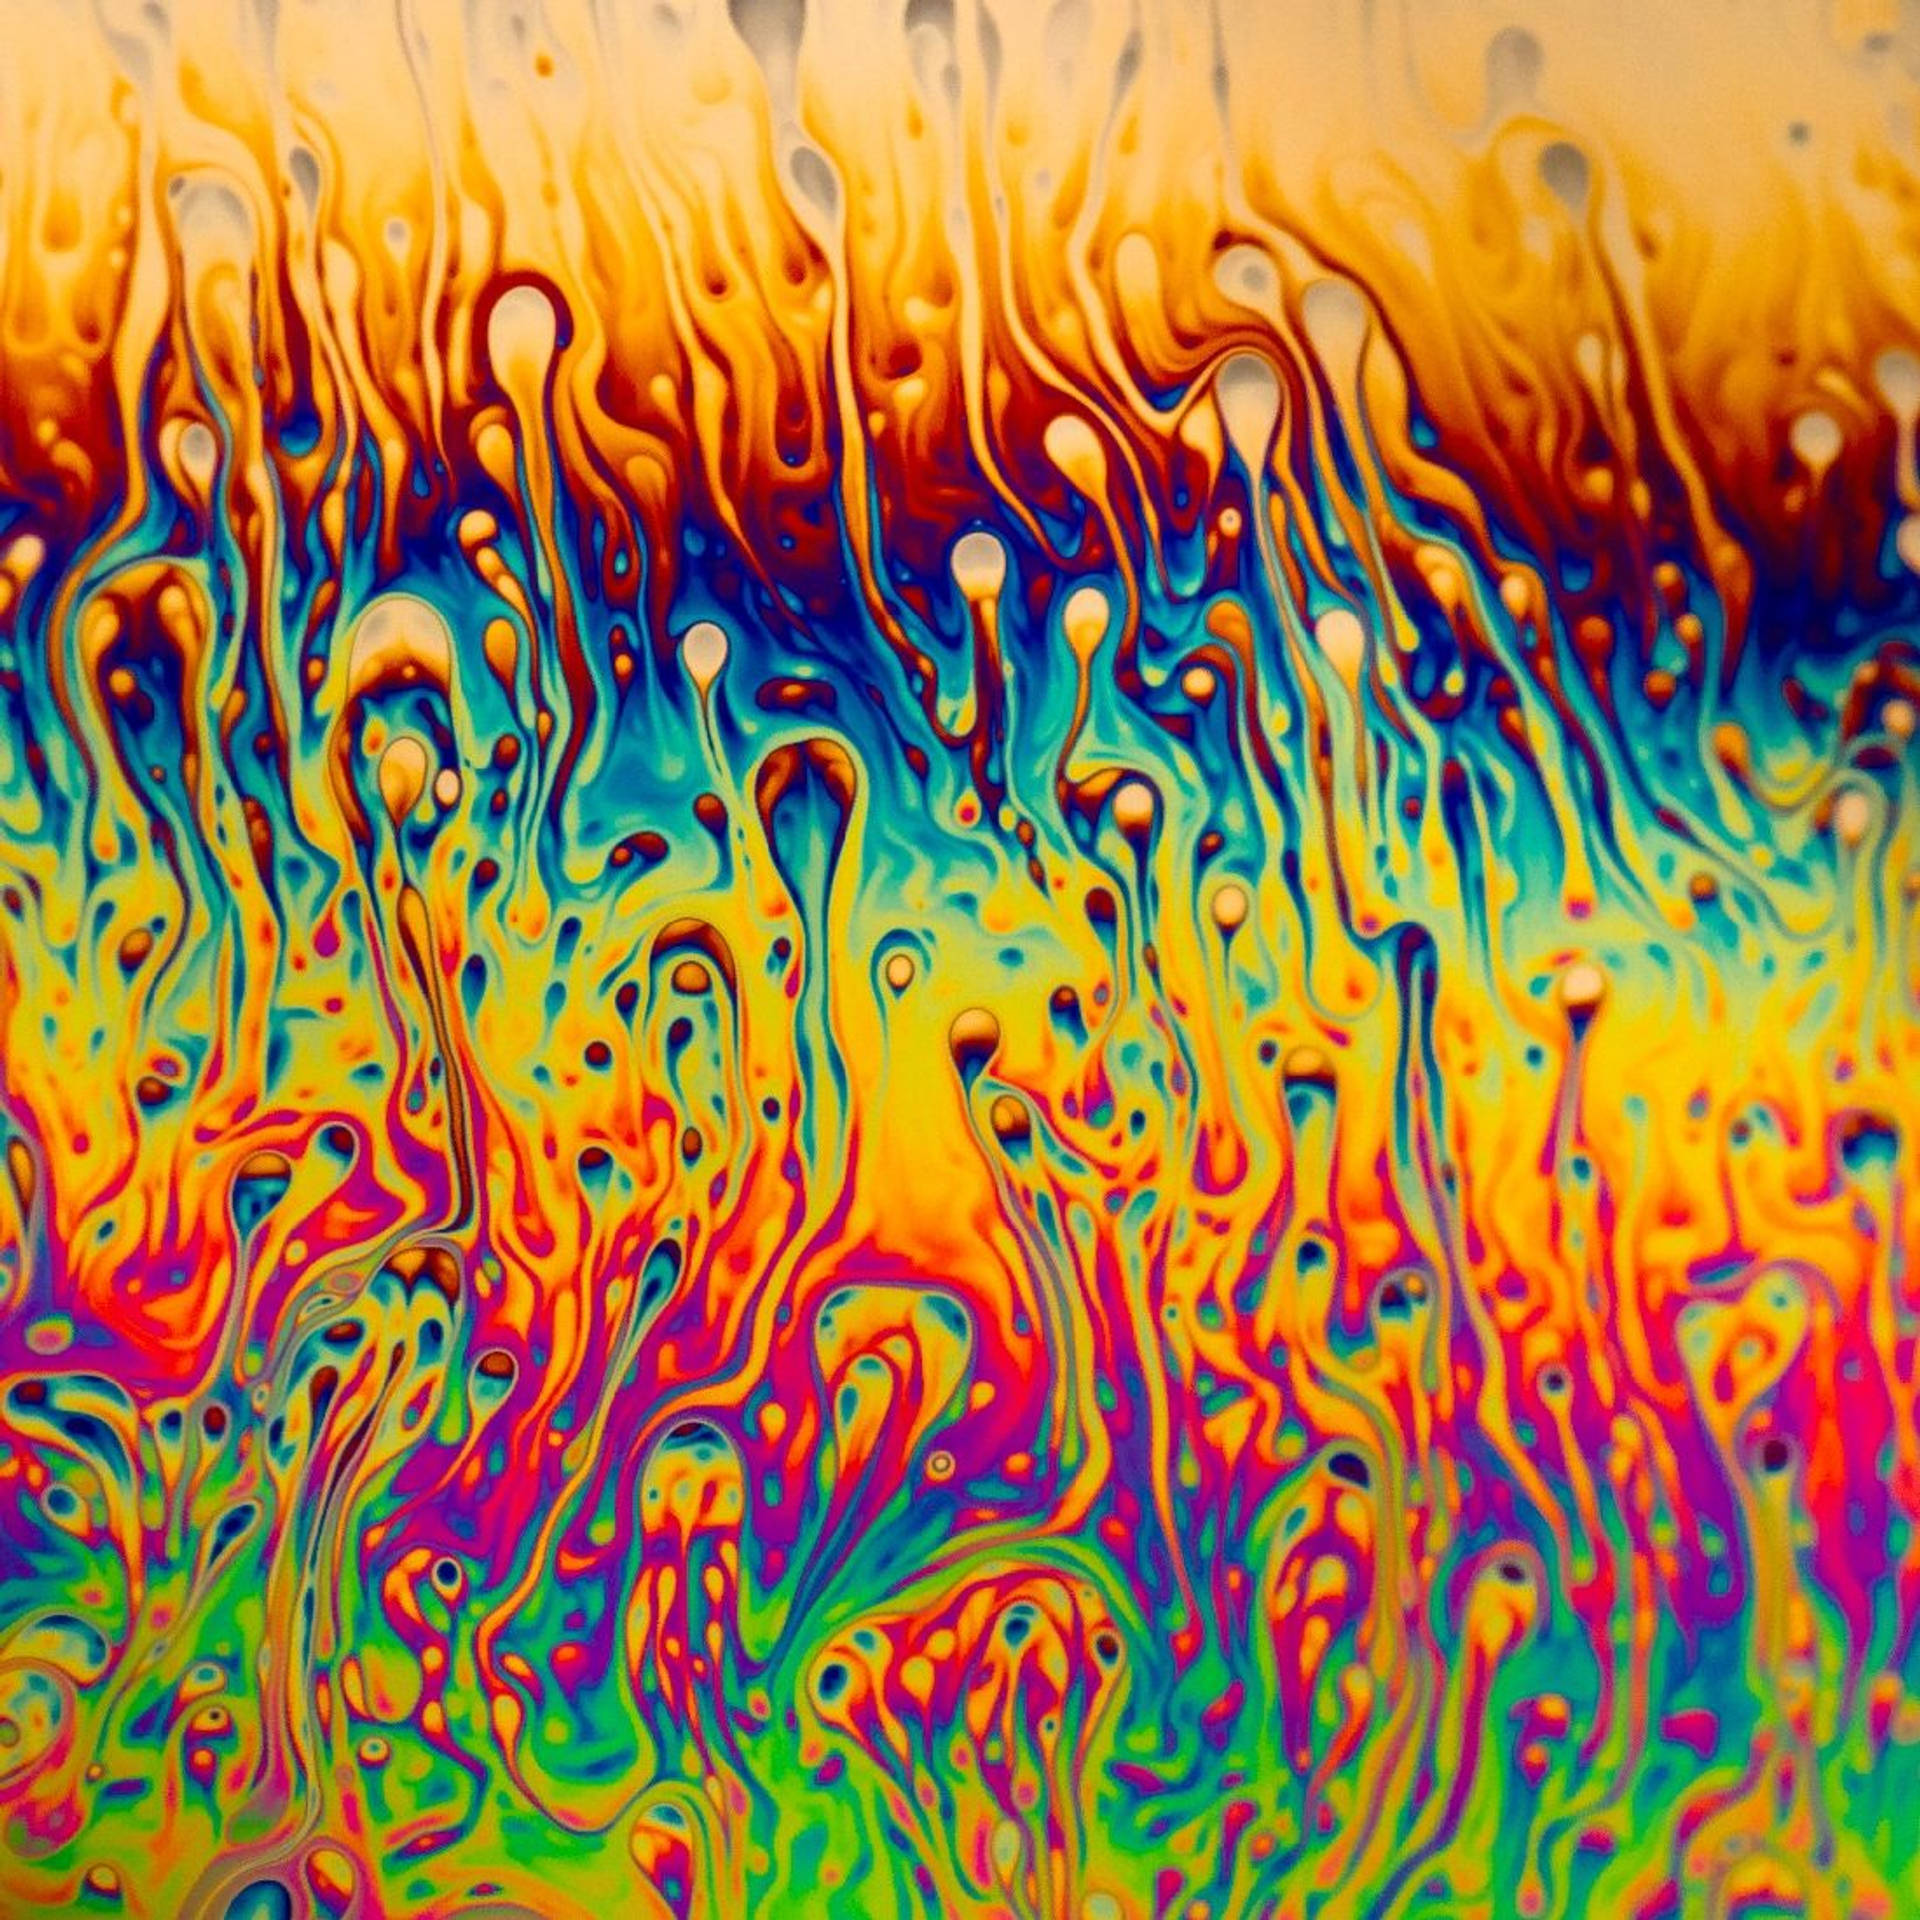 A Colorful Water Droplet On A Glass Wallpaper